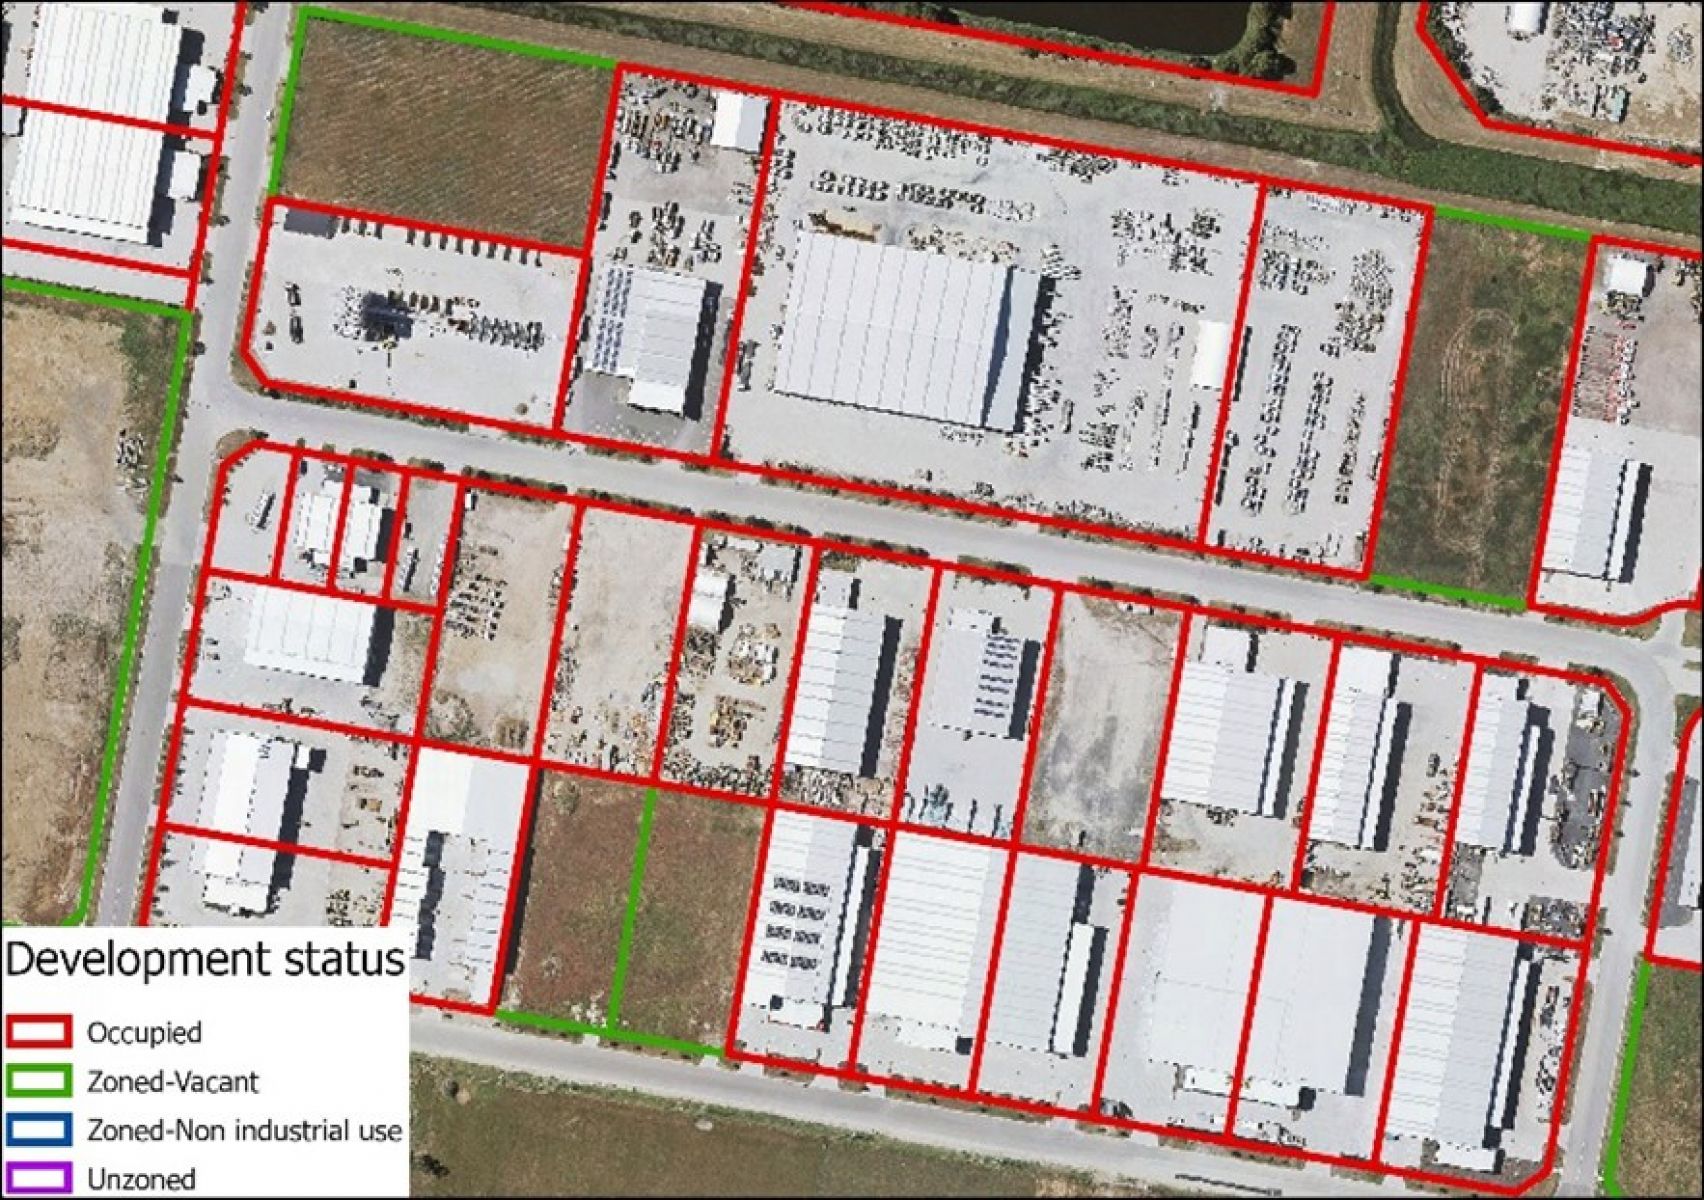 Figure 2: Parcels of non-industrial use, vacant and occupied industrial land. Image shows examples of non-industrial use that include single dwellings on large lots.